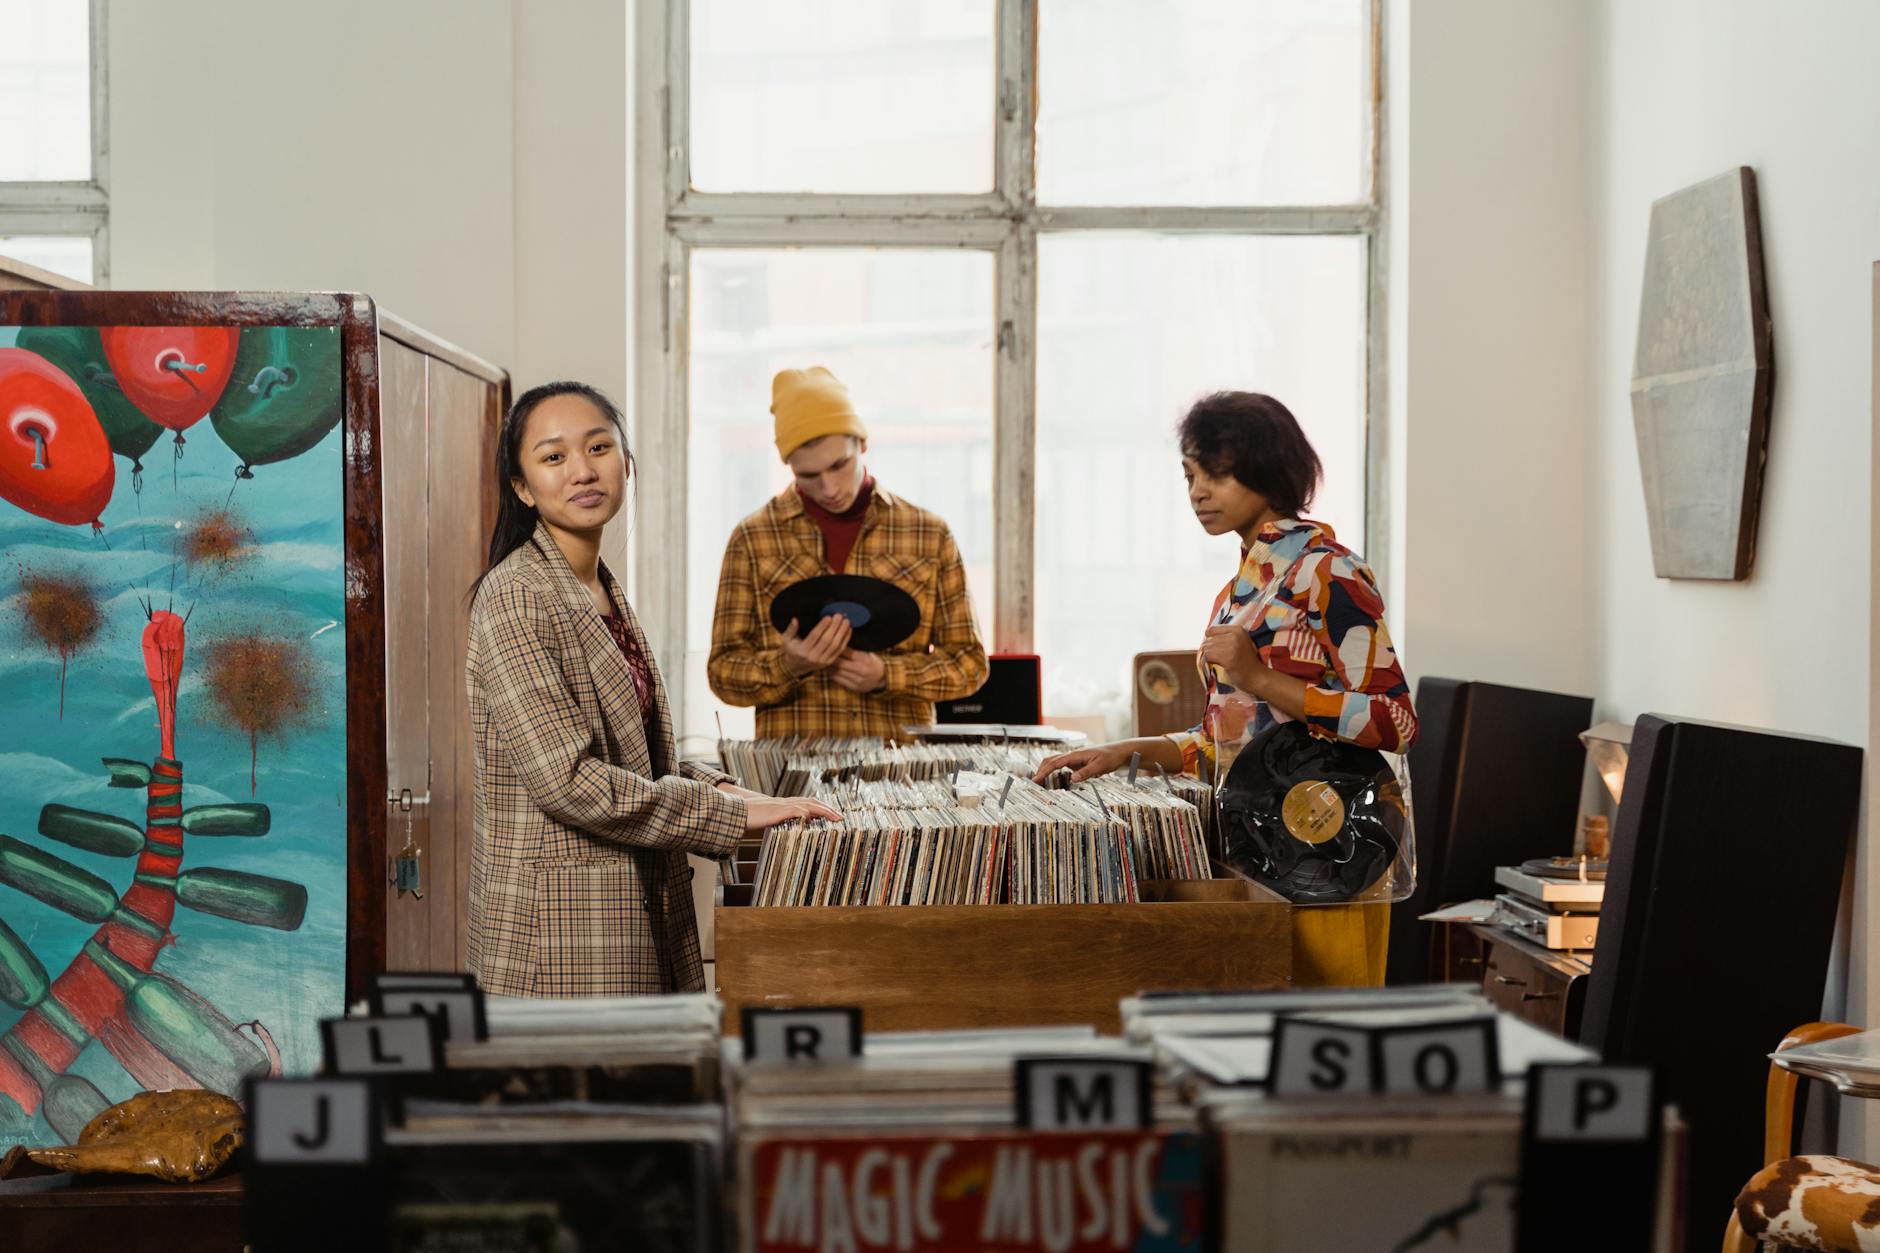 A Group of People Looking at Vintage Vinyl Records